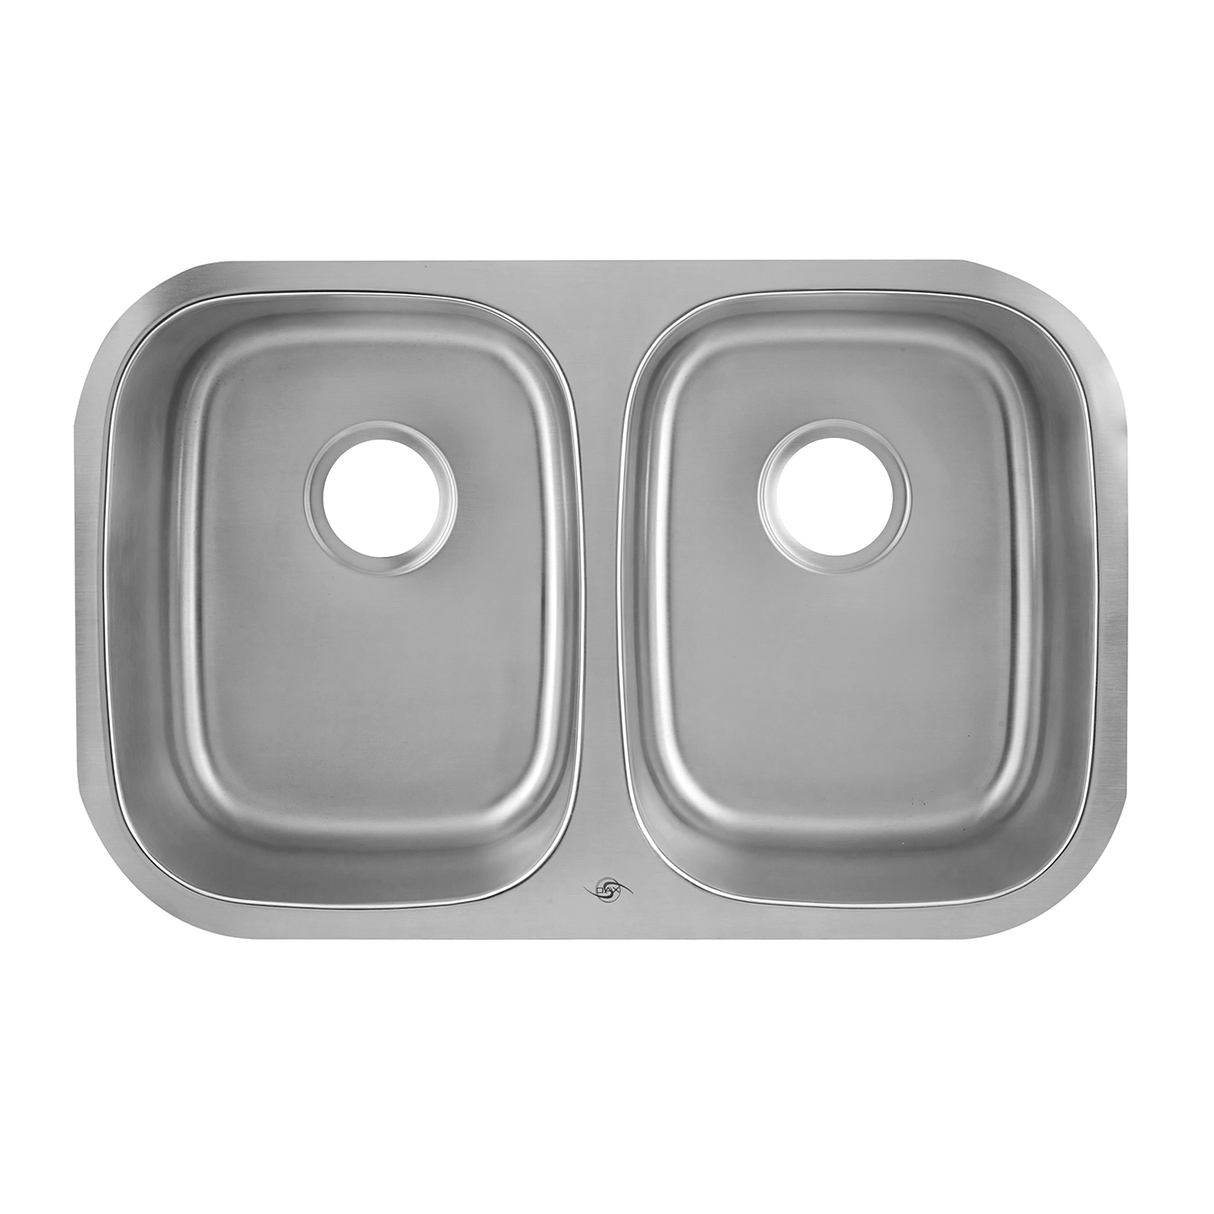 DAX Stainless Steel 50/ 50 Double Bowl Undermount Kitchen Sink, Brushed Stainless Steel DAX-2918